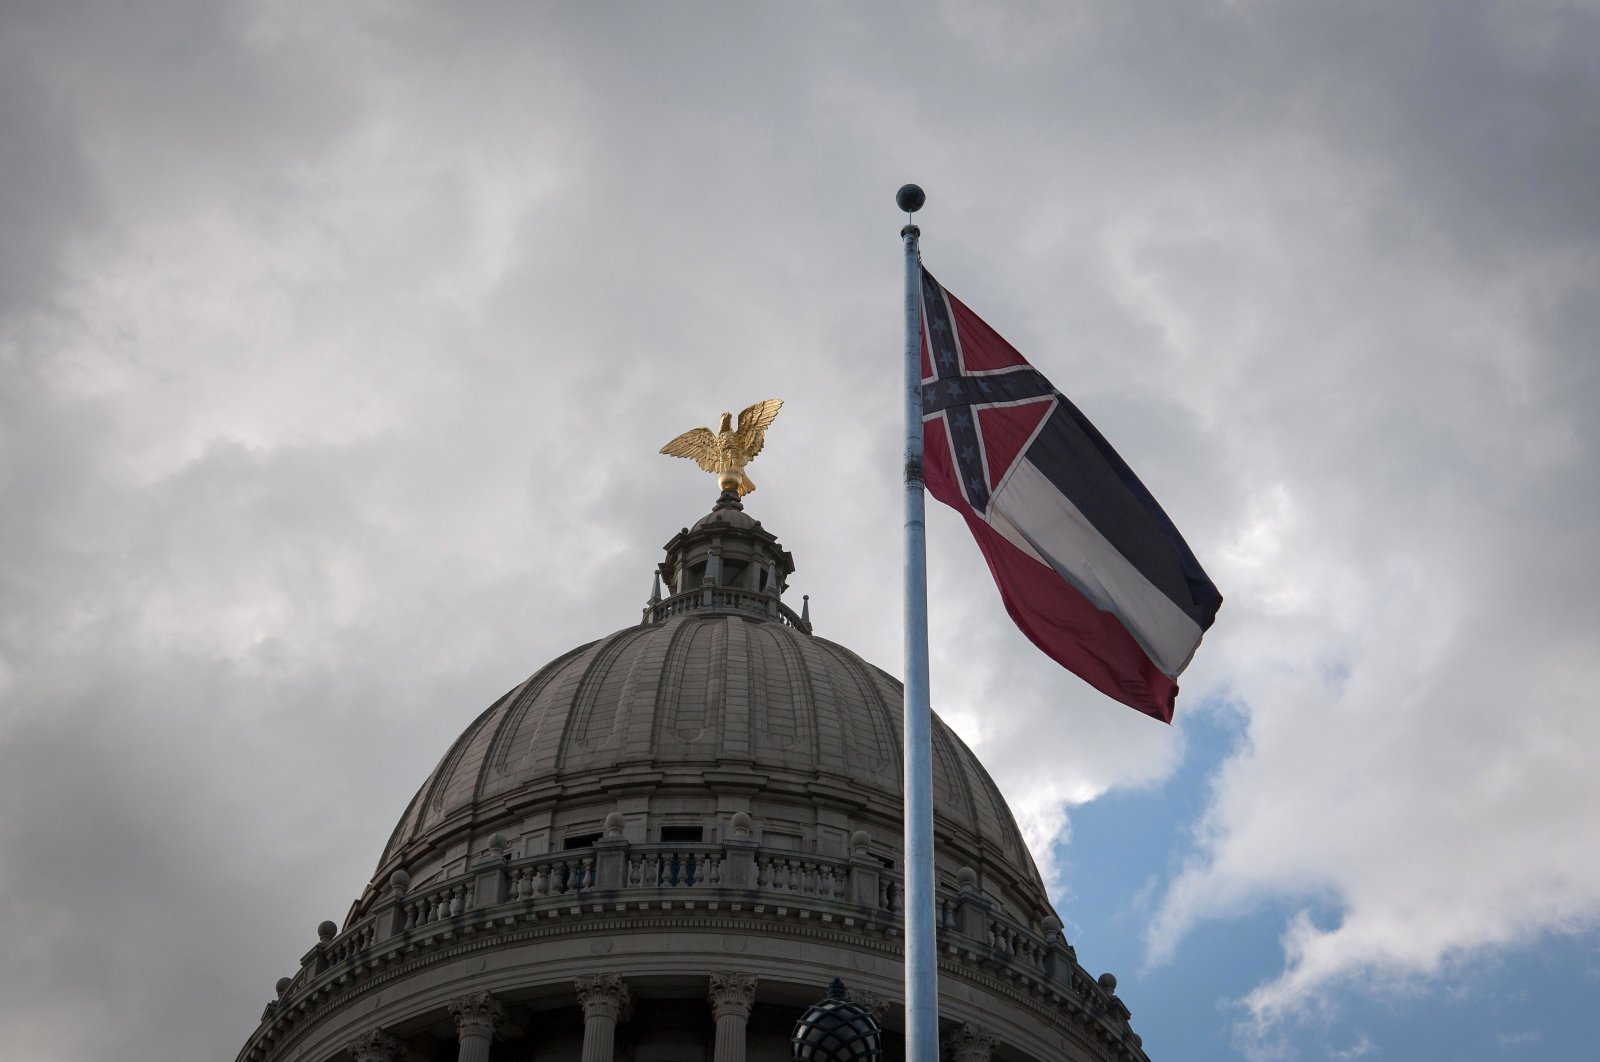 The Mississippi state flag flies in front of the Mississippi State Capitol building in Jackson, Mississippi, June 28, 2020. (AFP Photo)